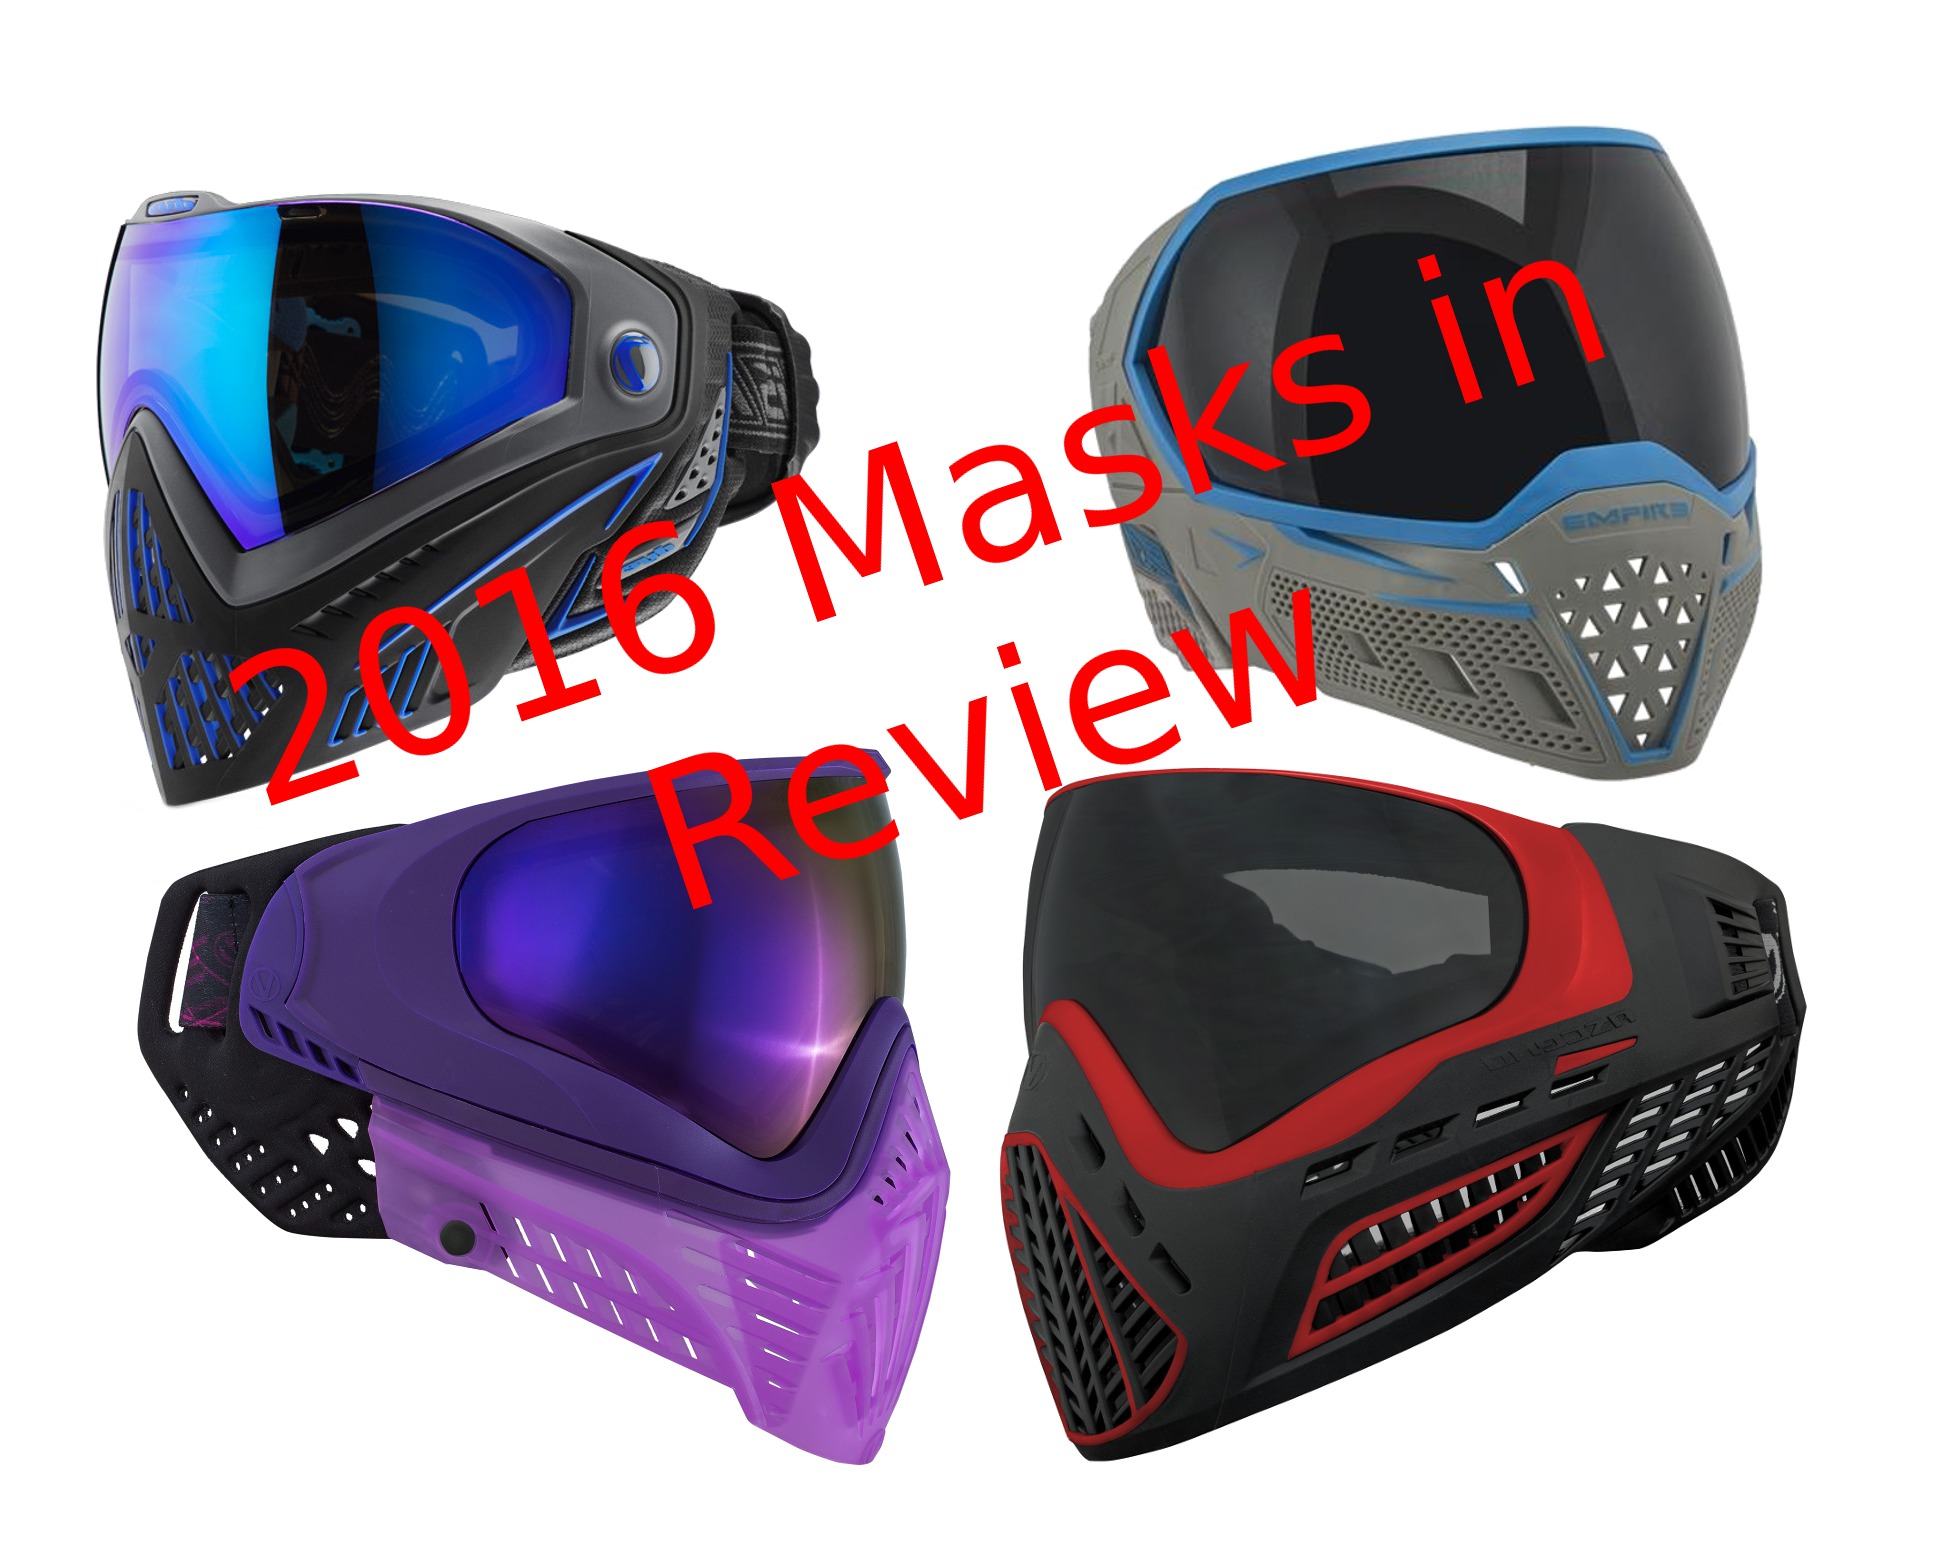 2016 Masks in Review